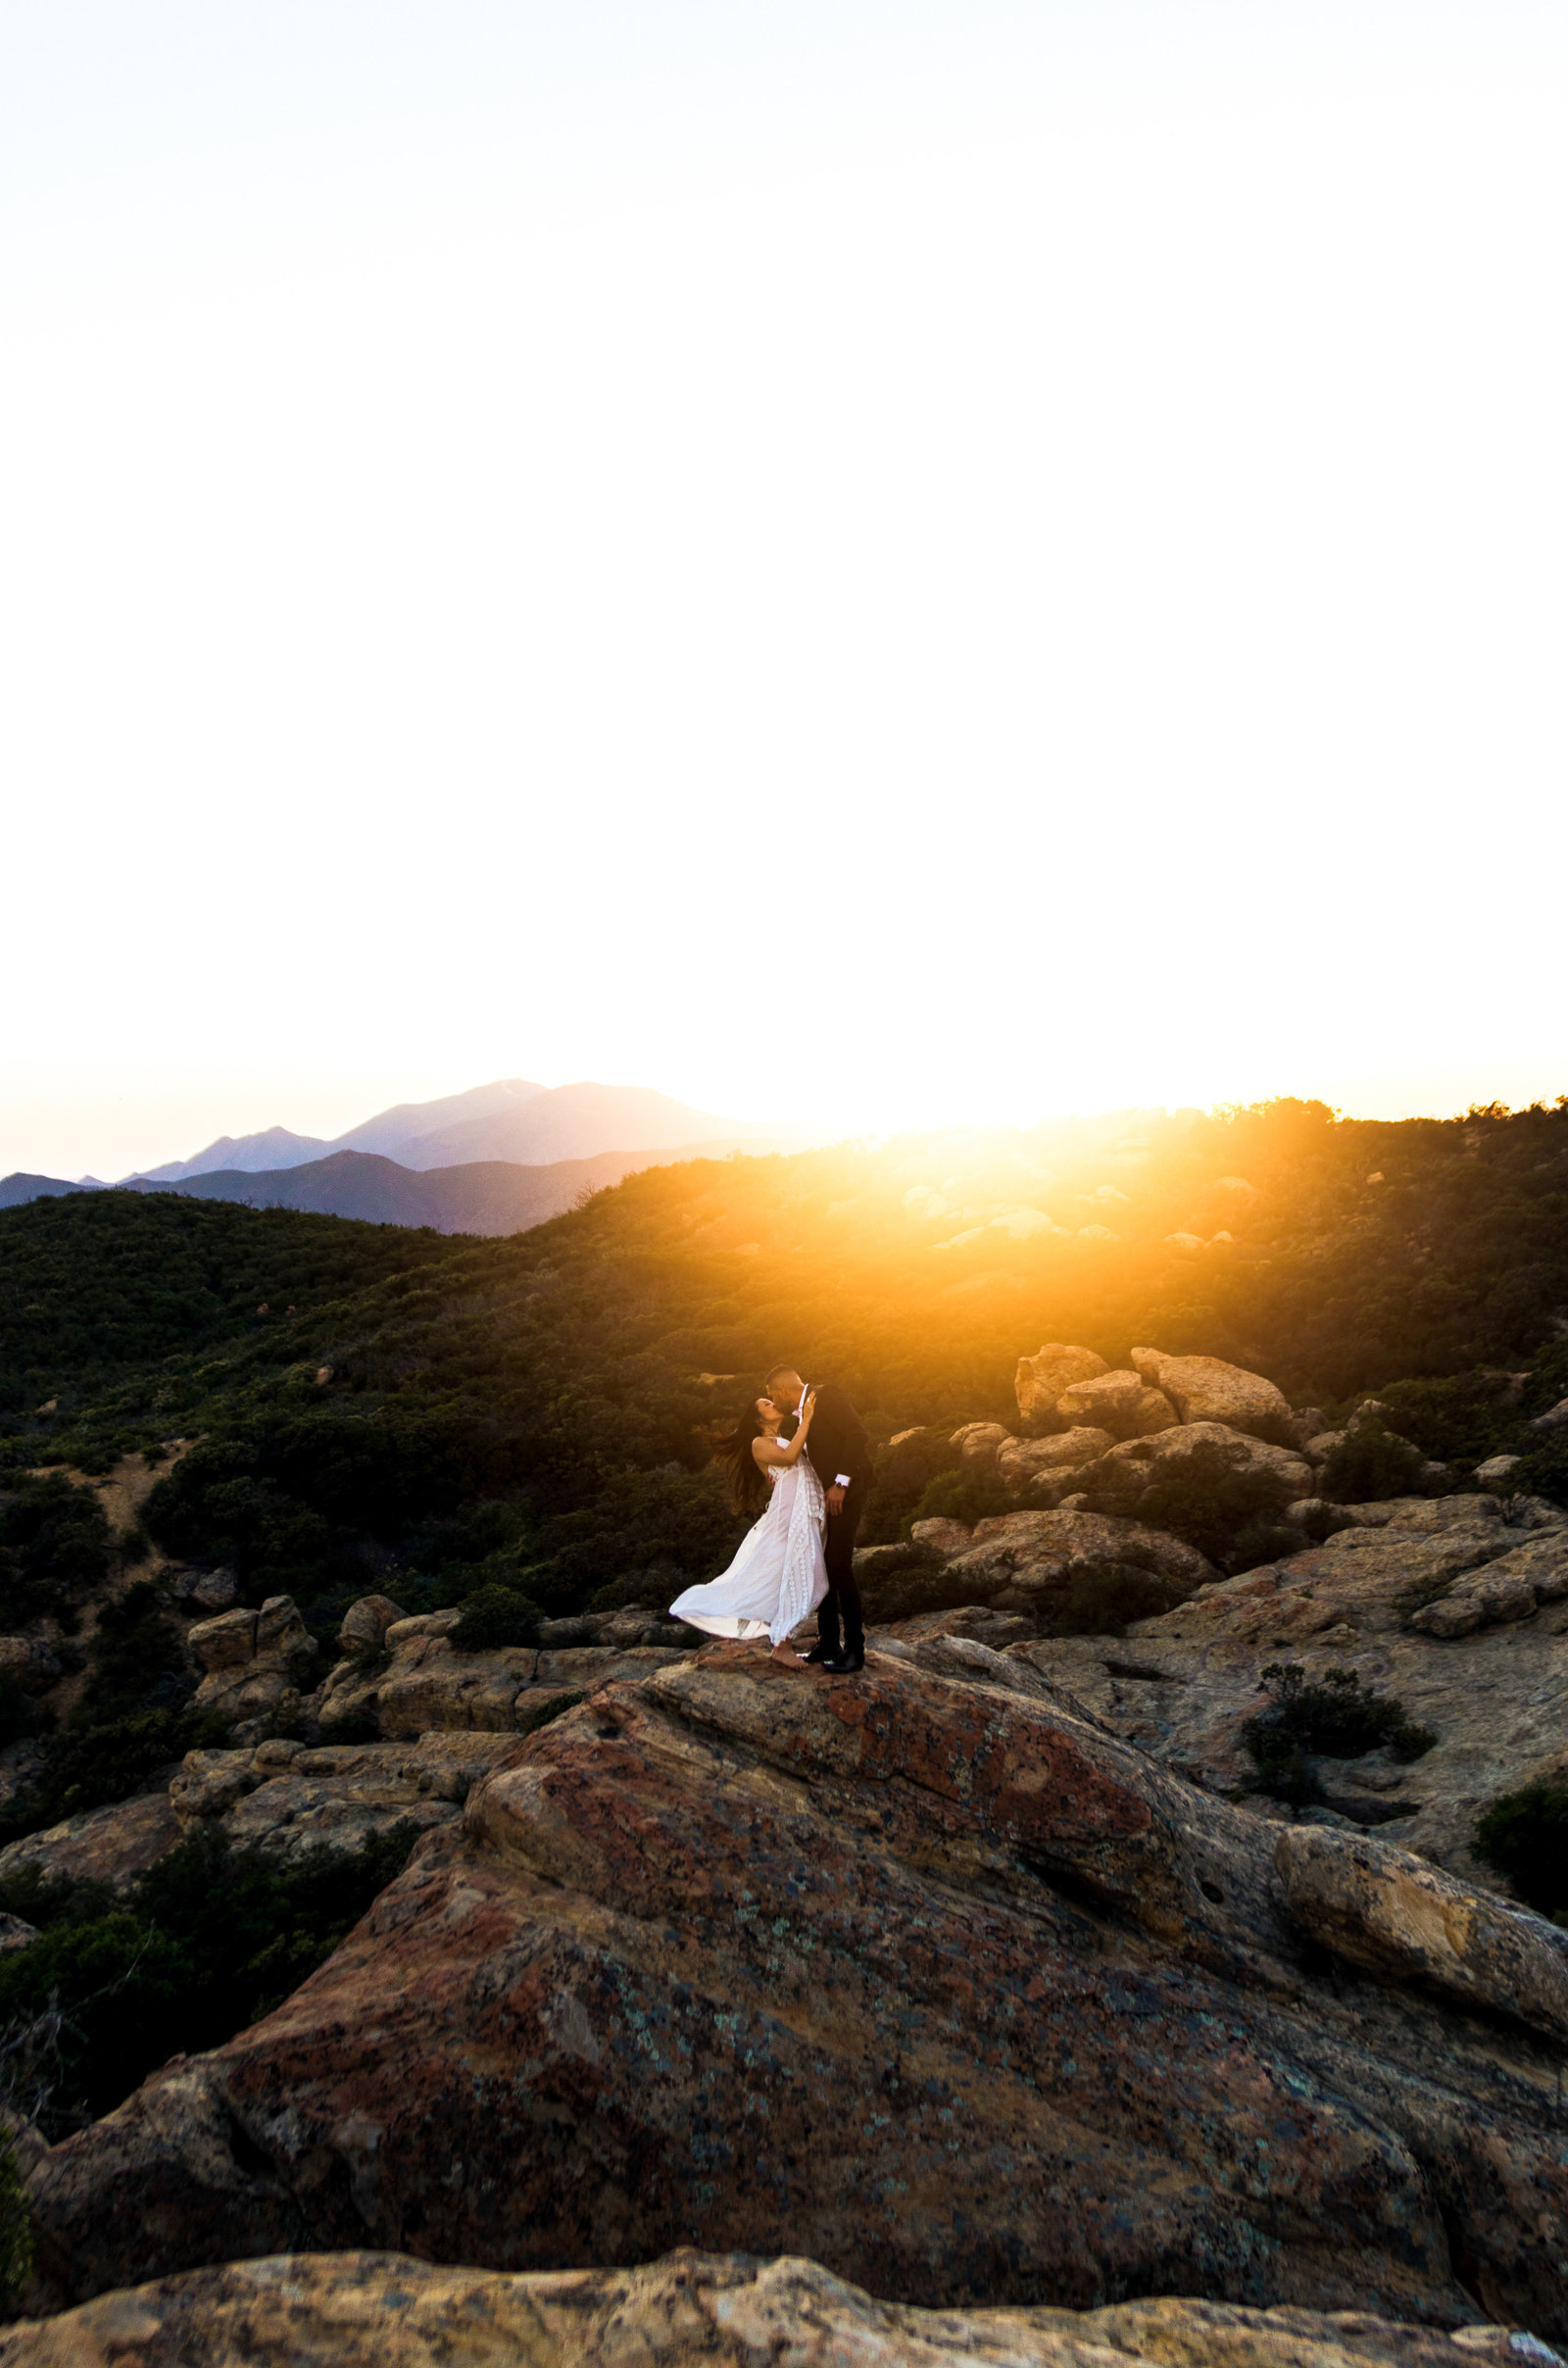 Wedding couple, standing on large rock kissing with mountains and sunset in the background.